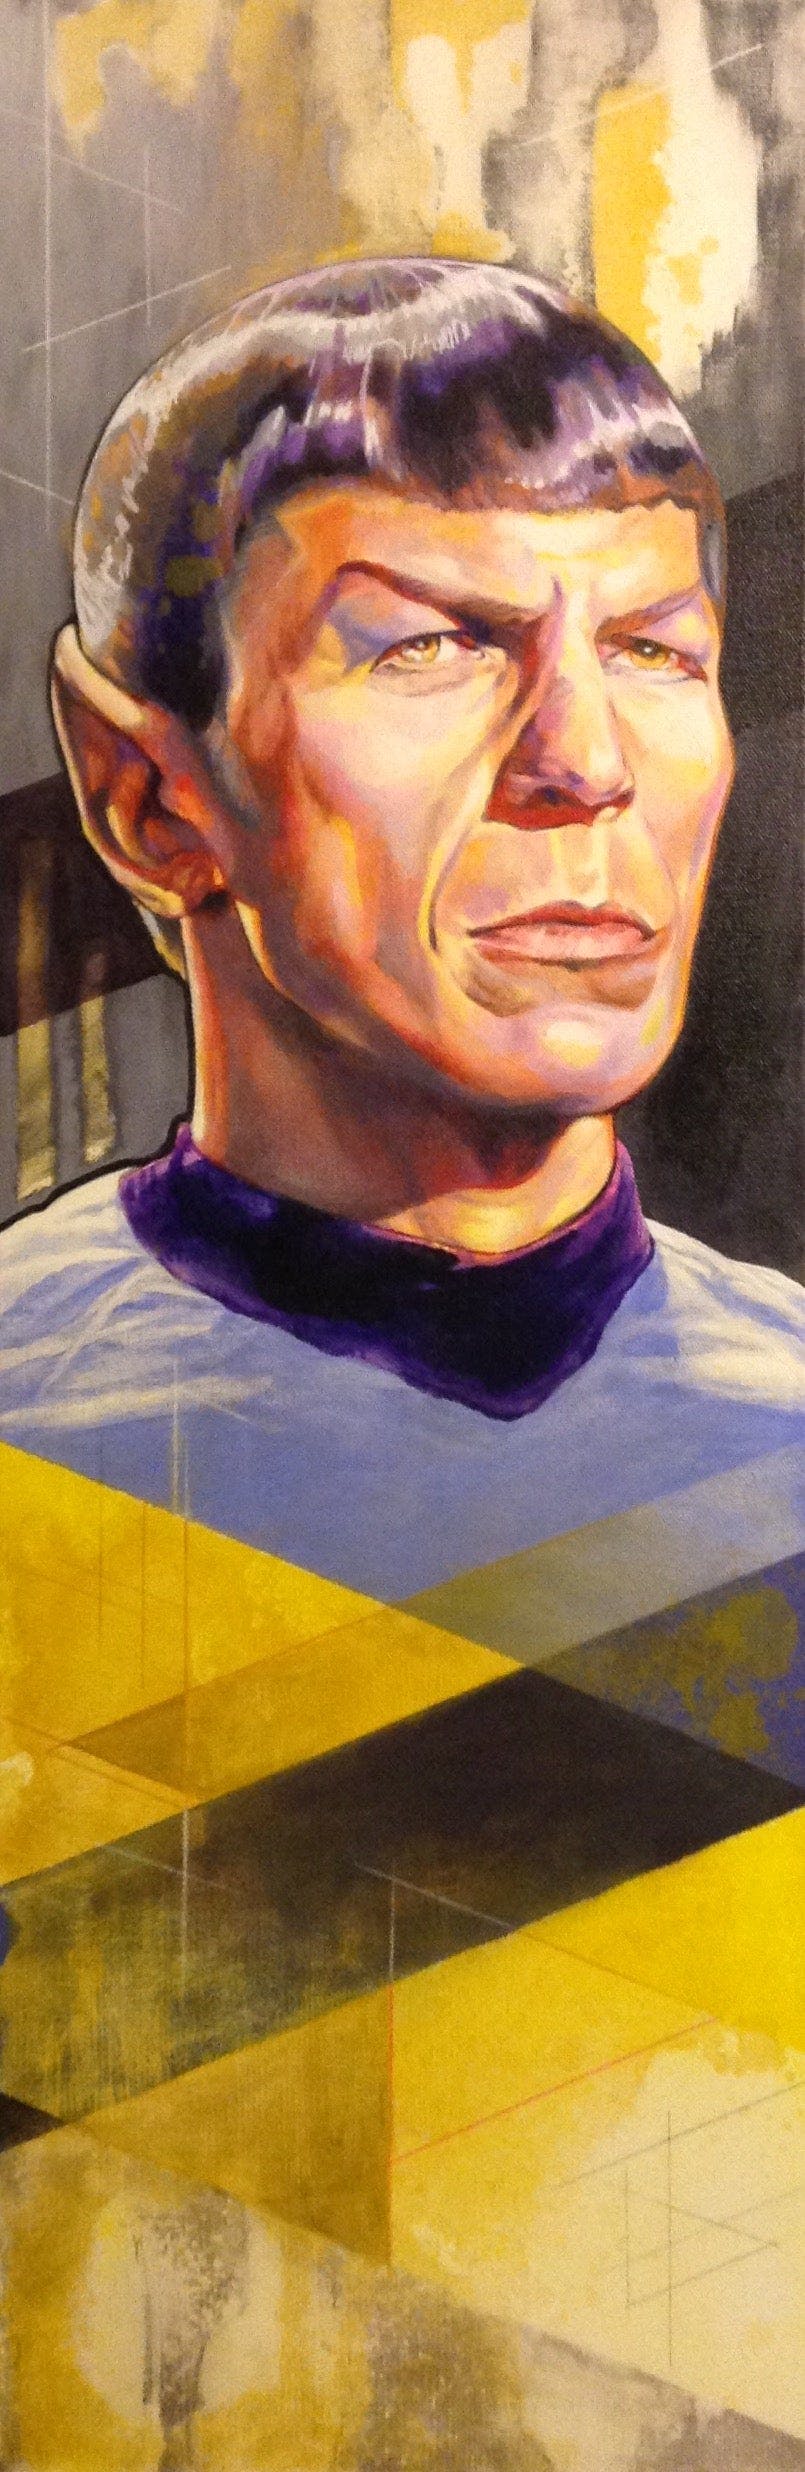 One of Maharaj's Spock portraits from her series.